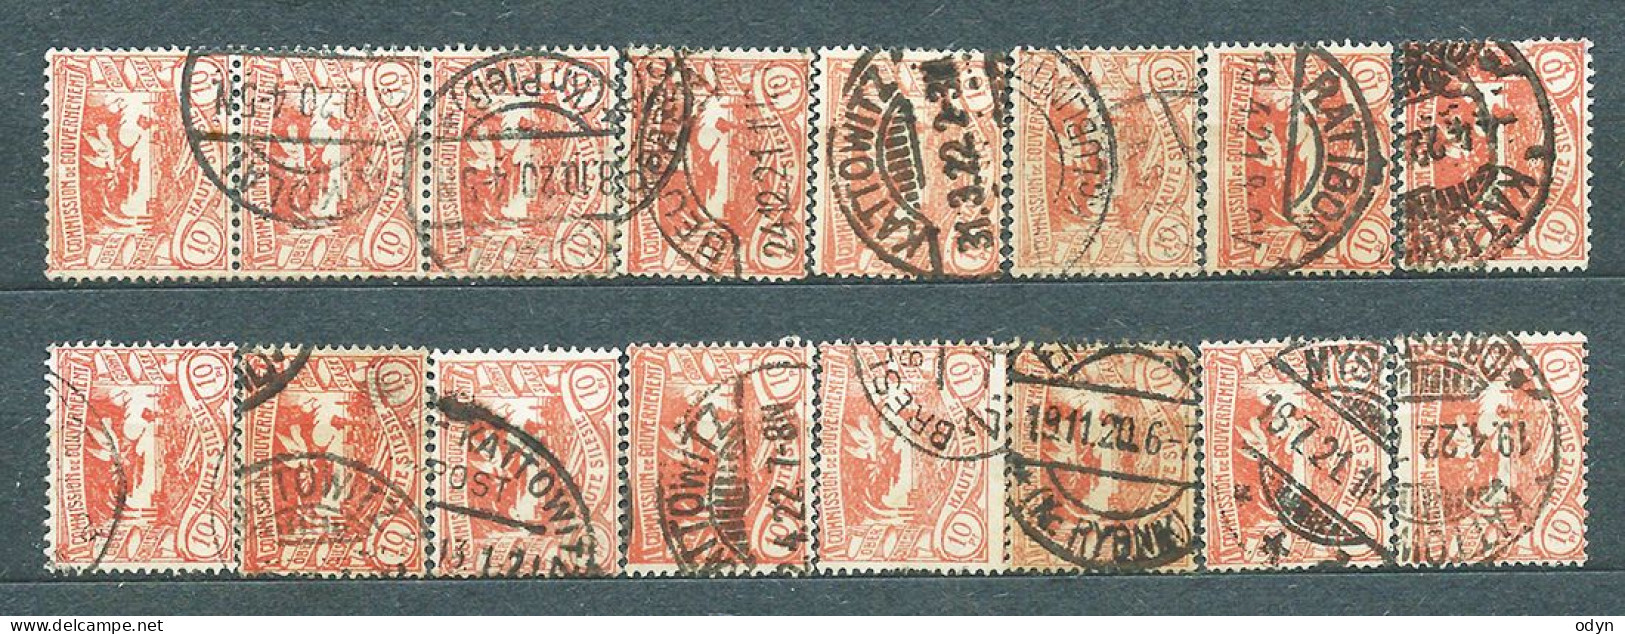 Plebiscite, Upper Silesia, 1920; Lot Of 287 Stamps From Set MiNr 13-29 - Used - Slesia